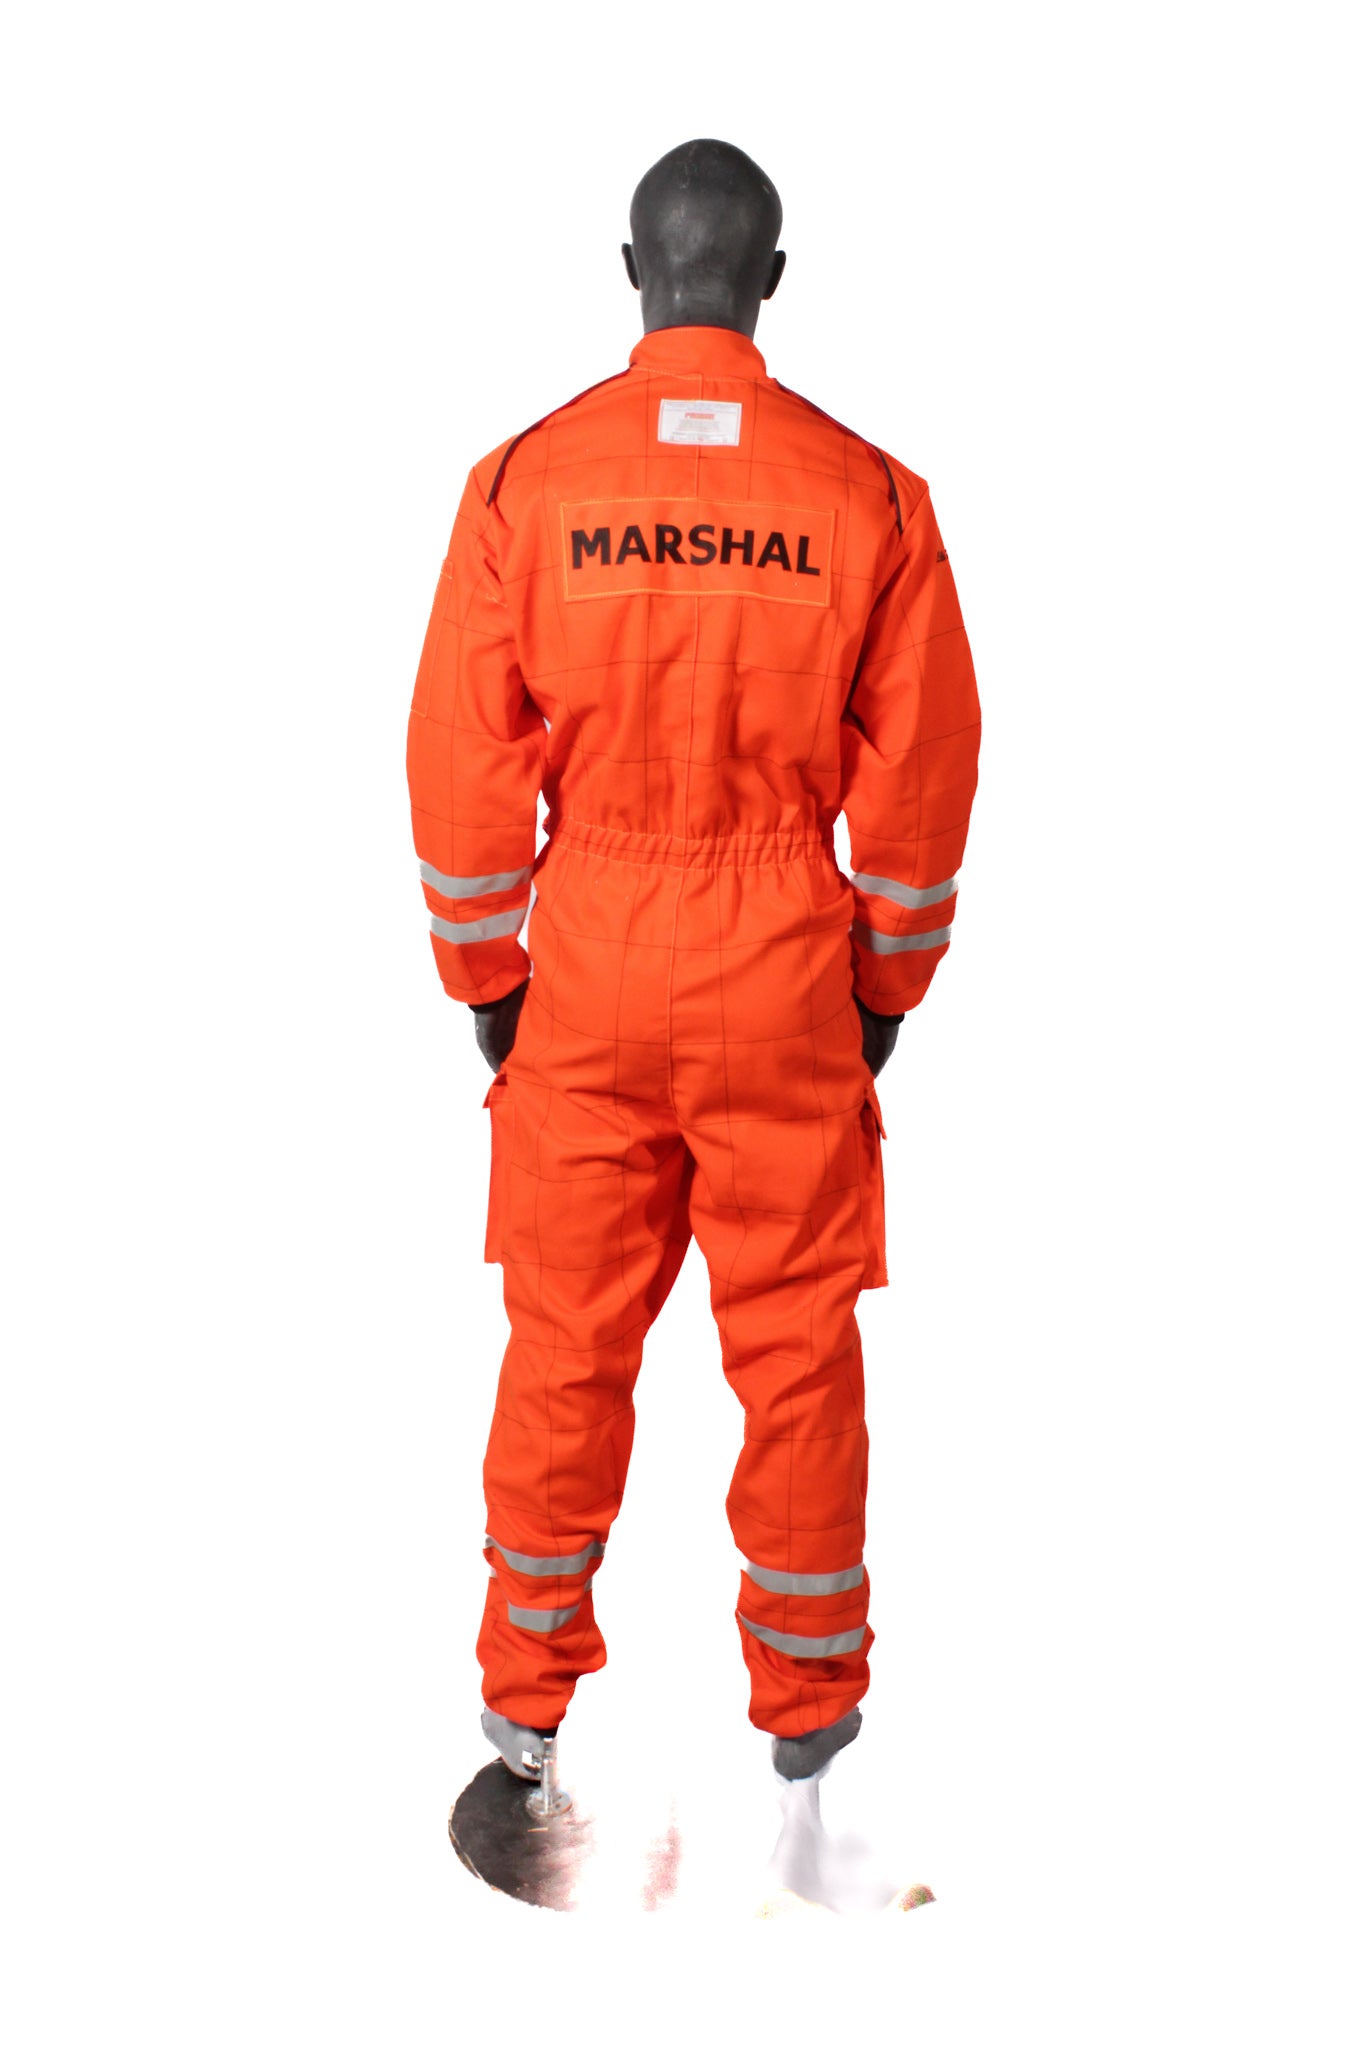 Marshal Professional Suit - Made-to-Measure